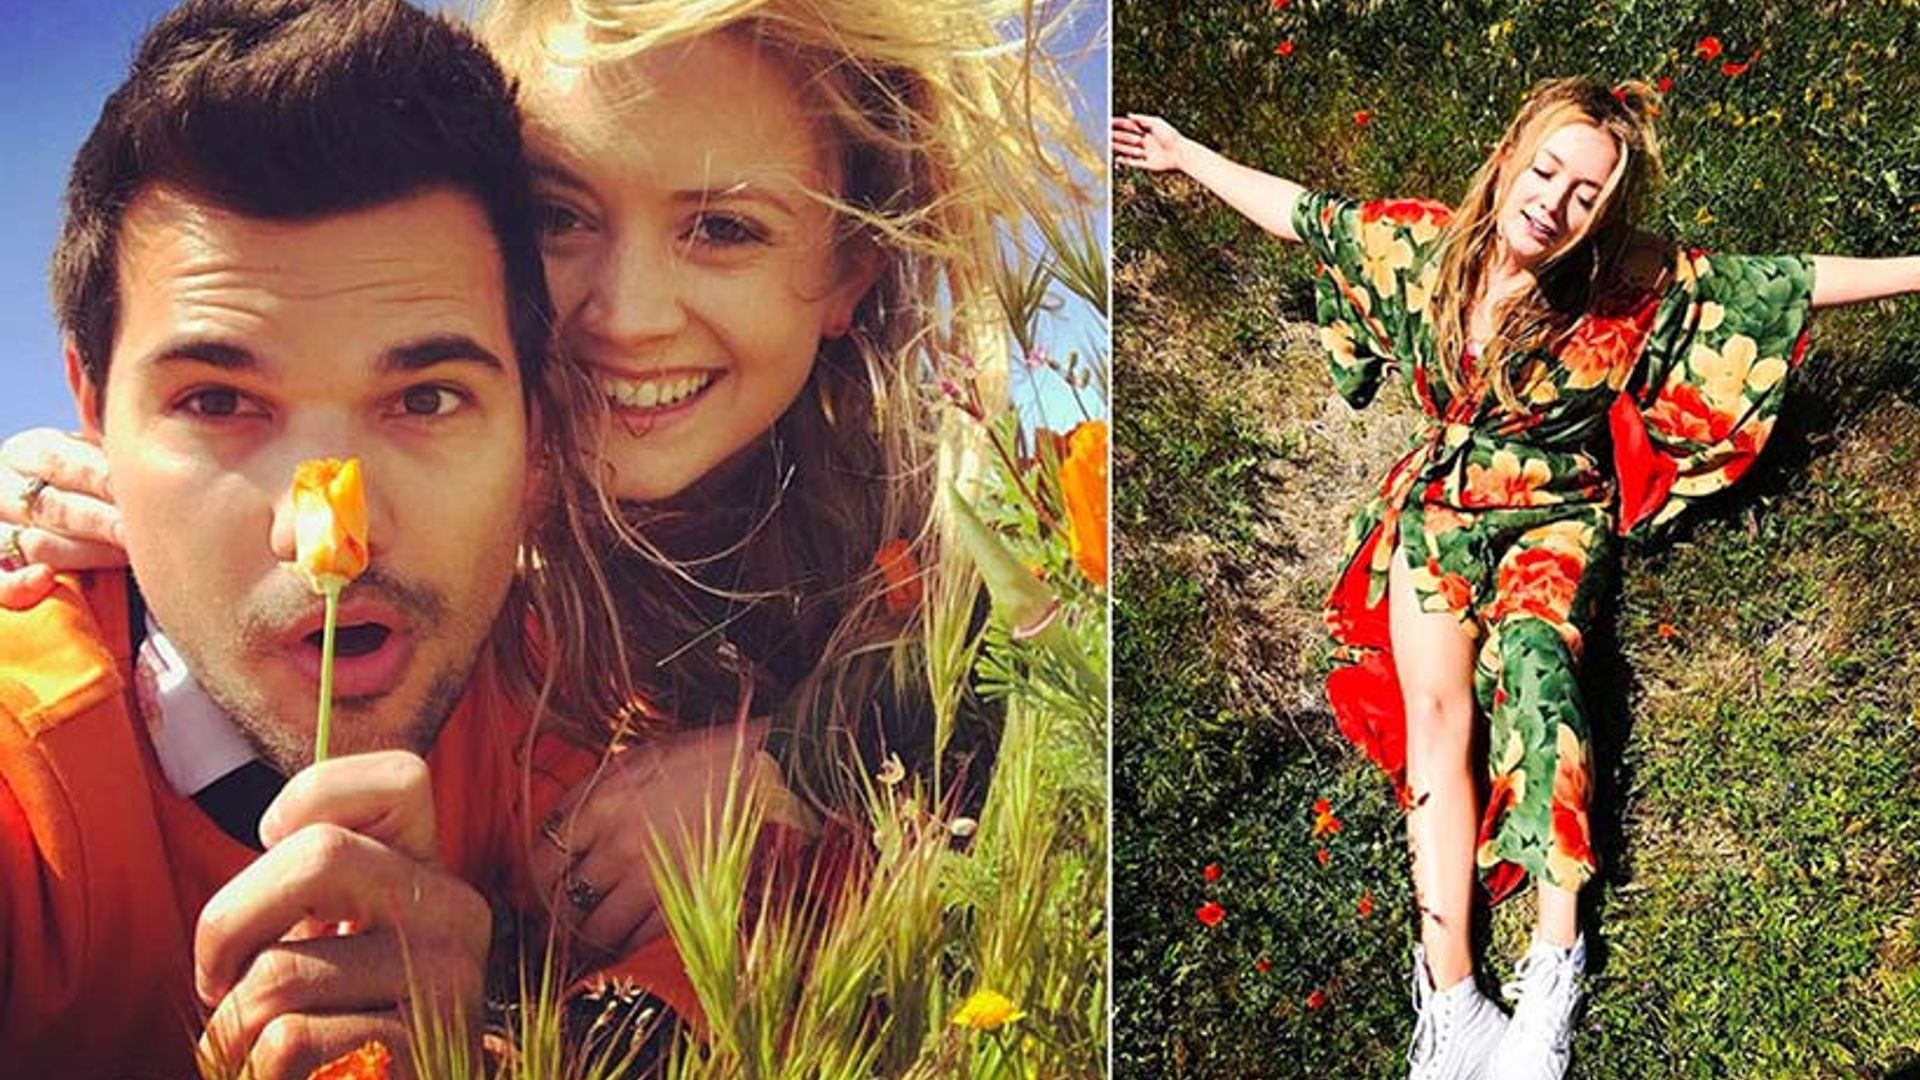 Billie Lourd and Taylor Lautner celebrate spring in a poppy field